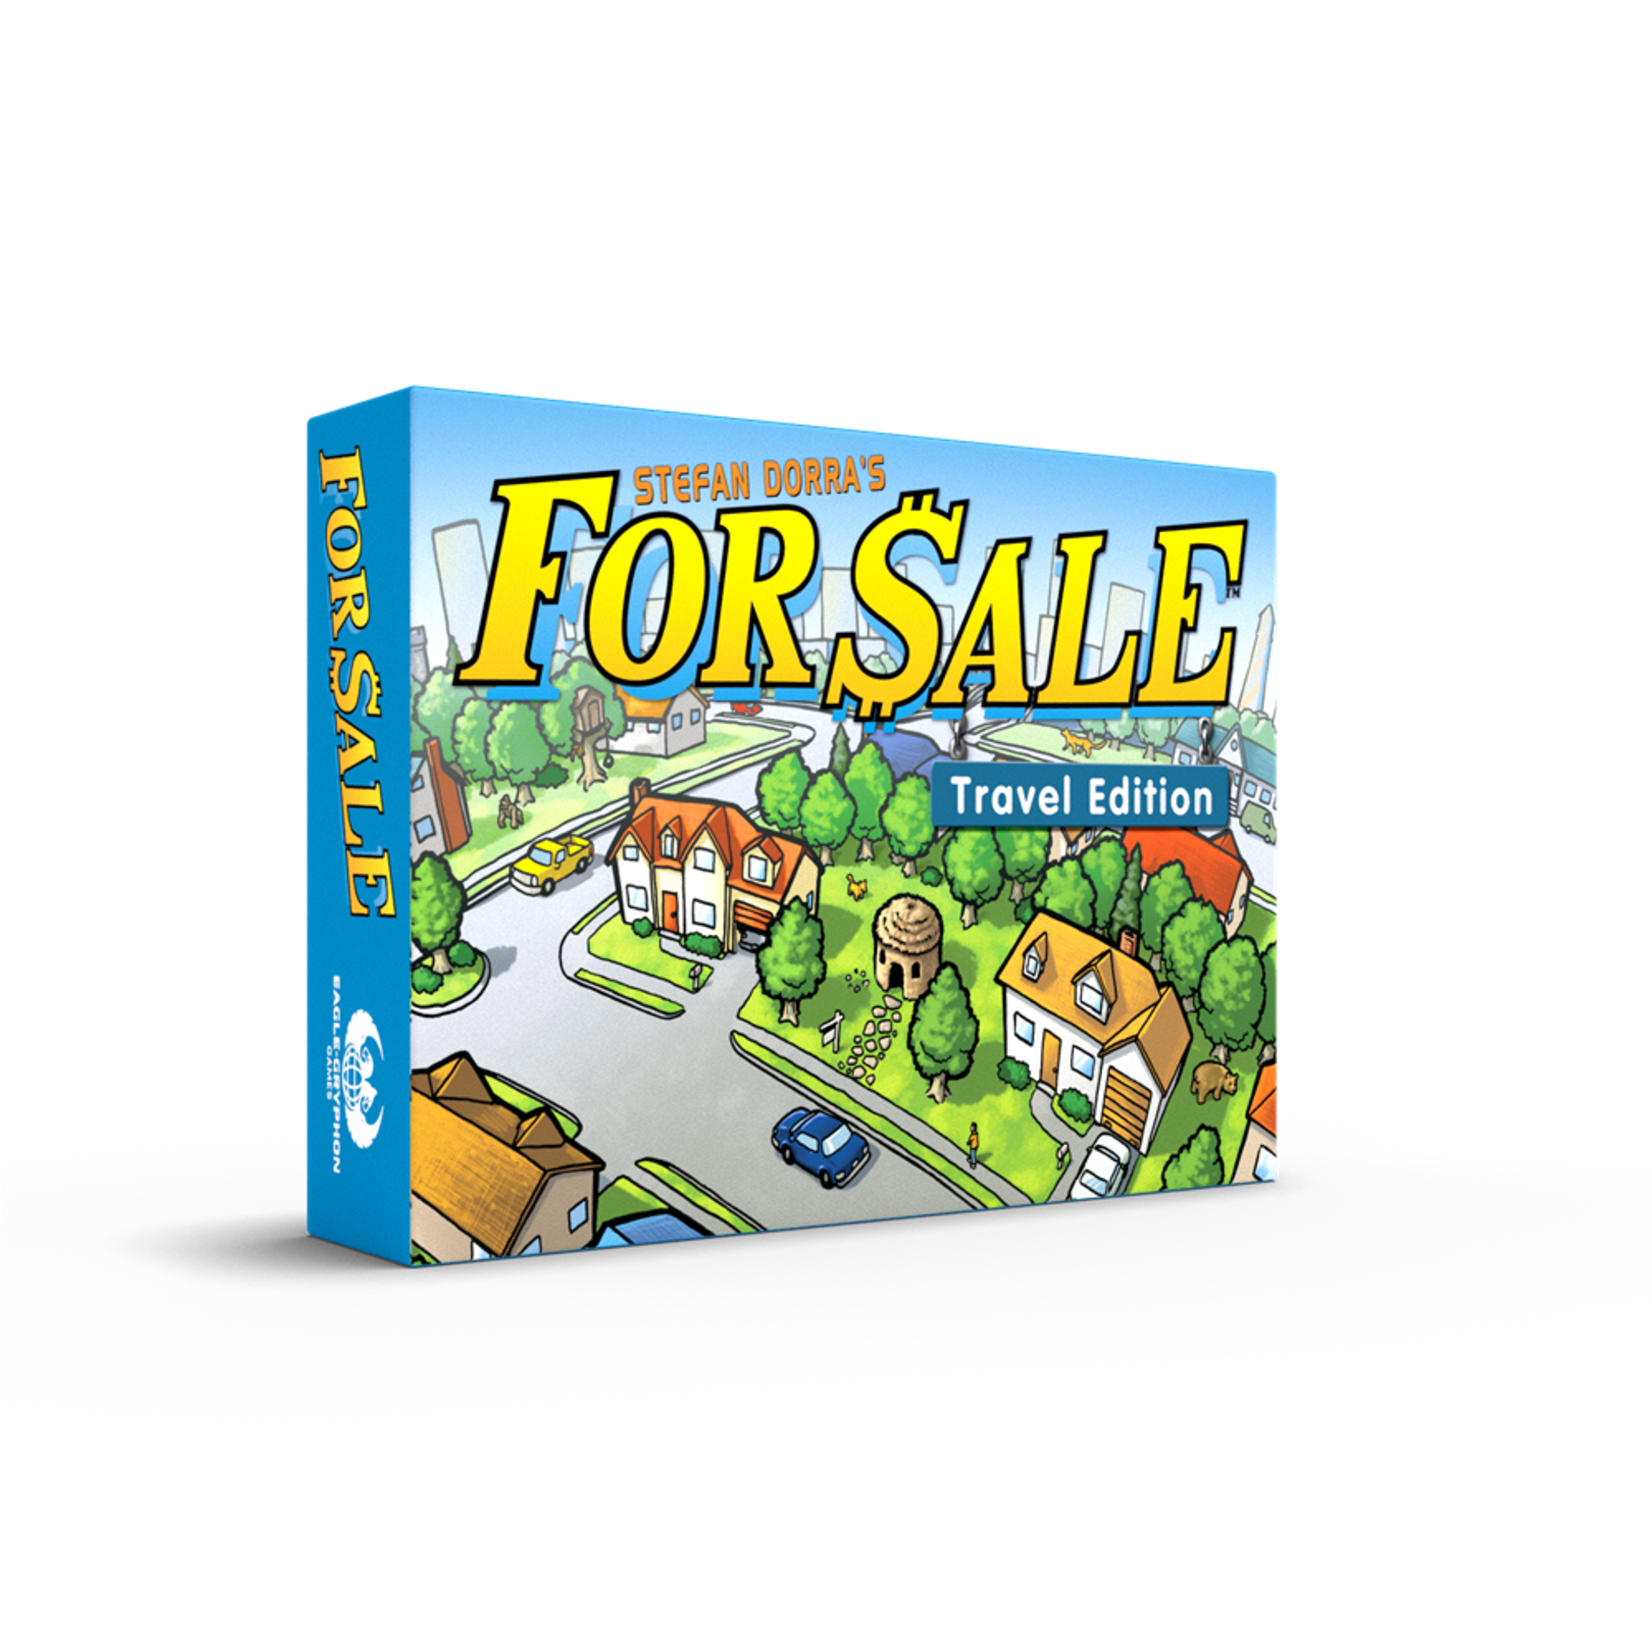 Eagle-Gryphon Games For Sale Travel Edition